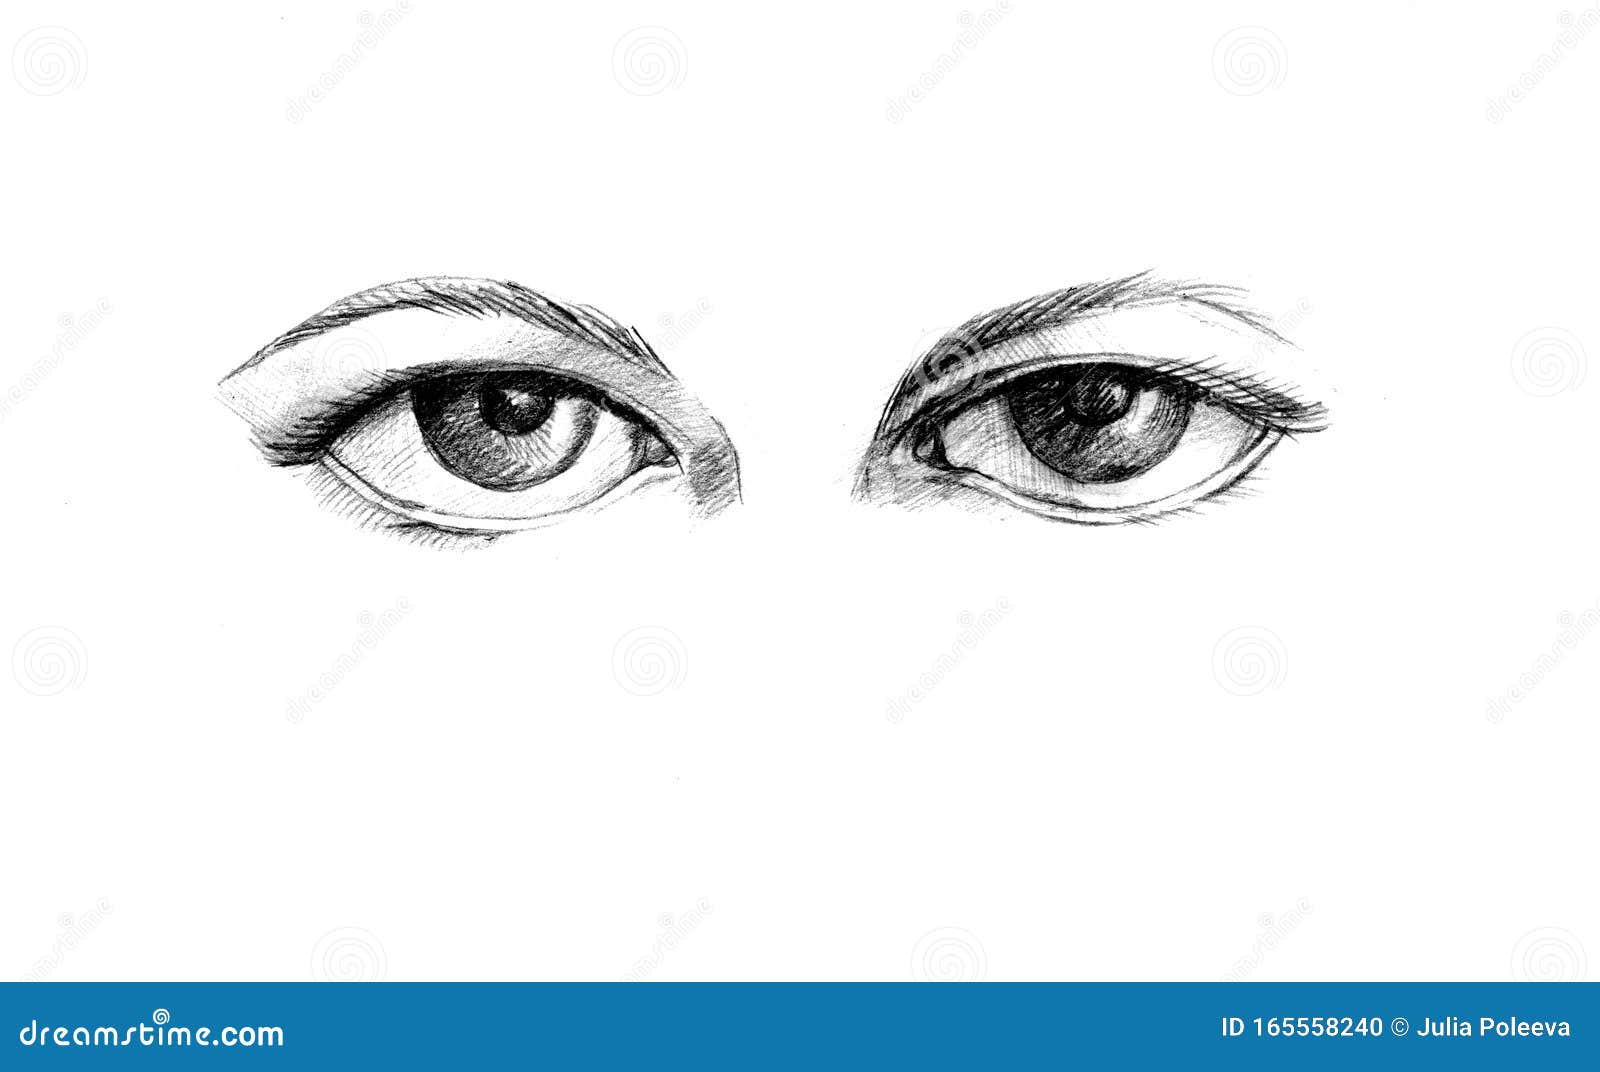 How to Draw BOTH Eyes Evenly  Easy Step by Step Art Drawing Tutorial   YouTube